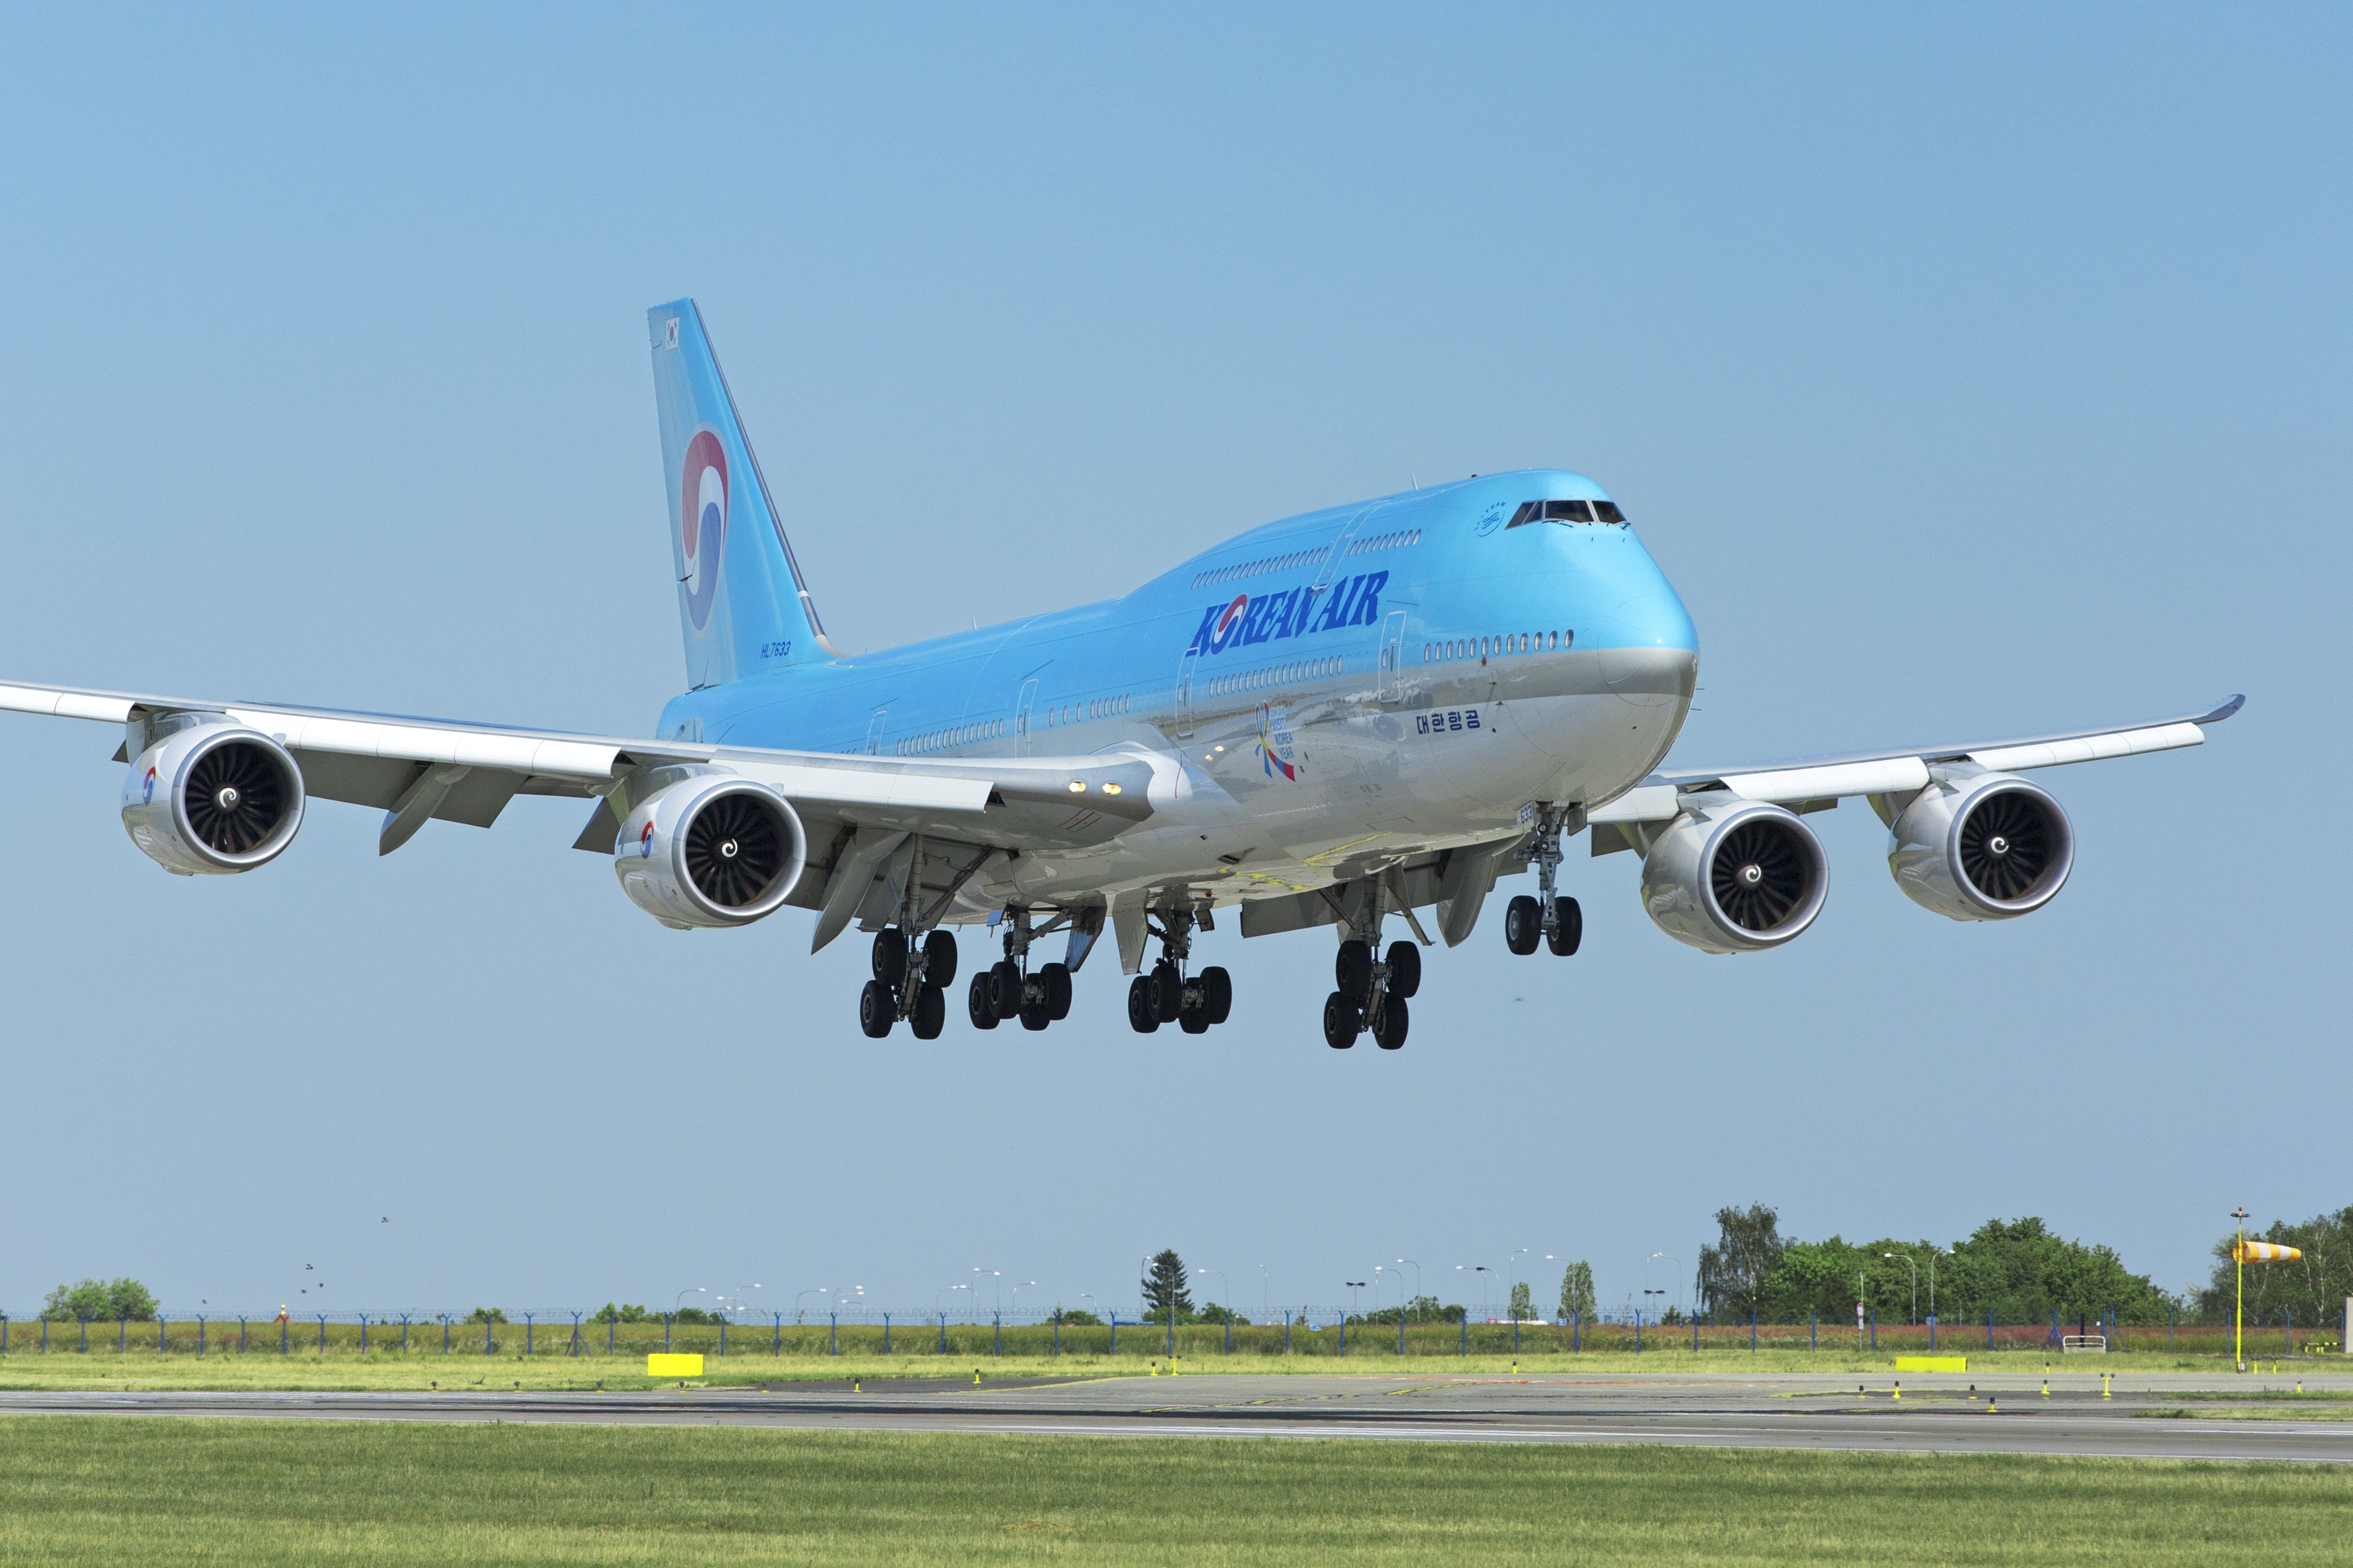 korean air sells 5 boeing 747s to us air force contractor for new $13 billion doomsday plane program